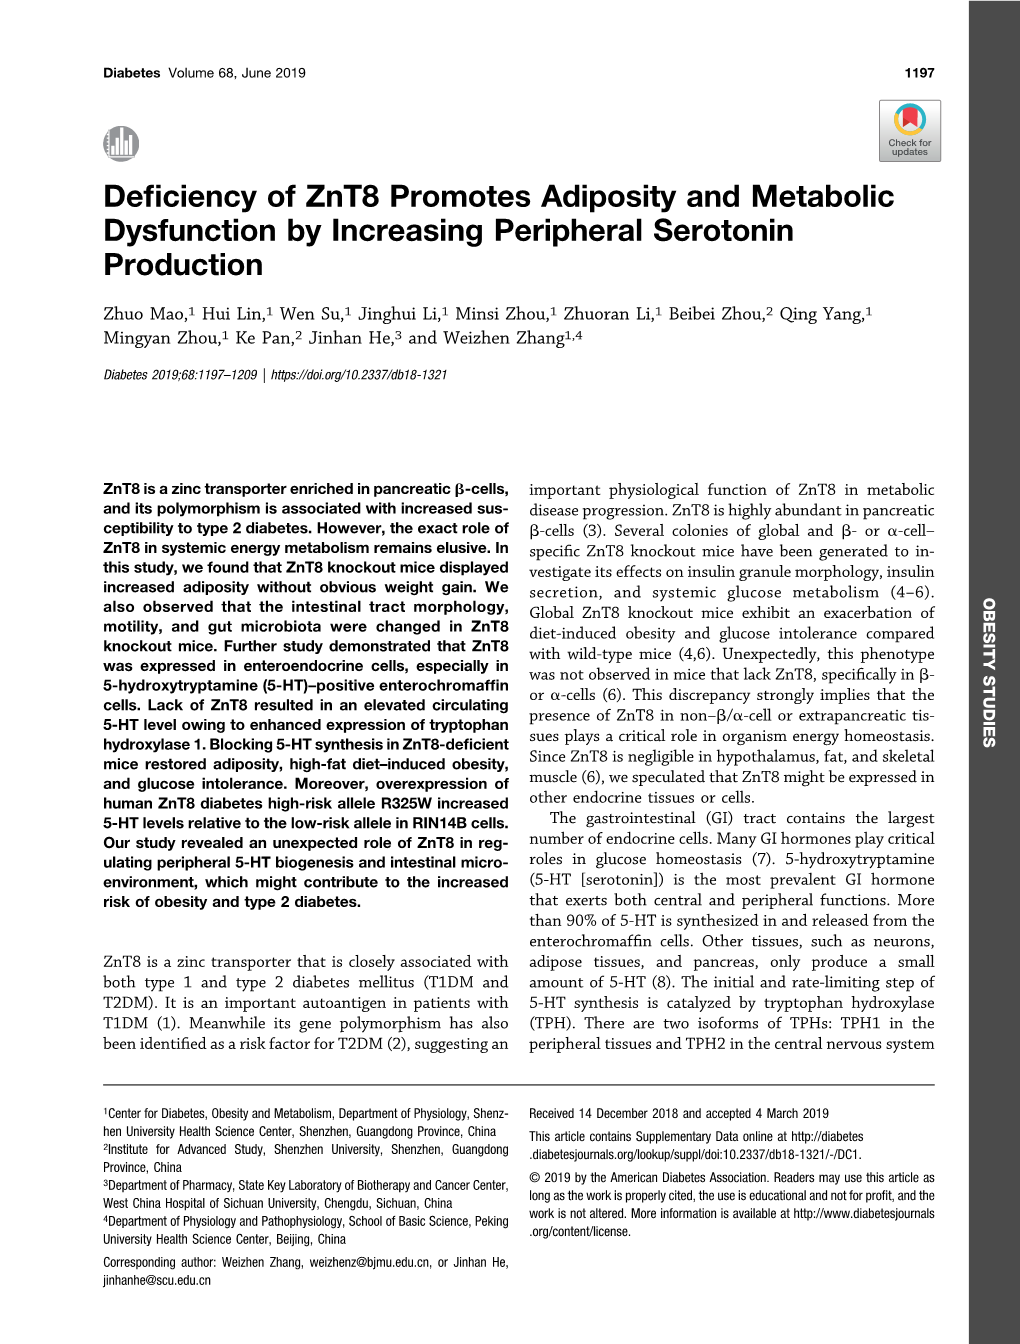 Deficiency of Znt8 Promotes Adiposity and Metabolic Dysfunction By